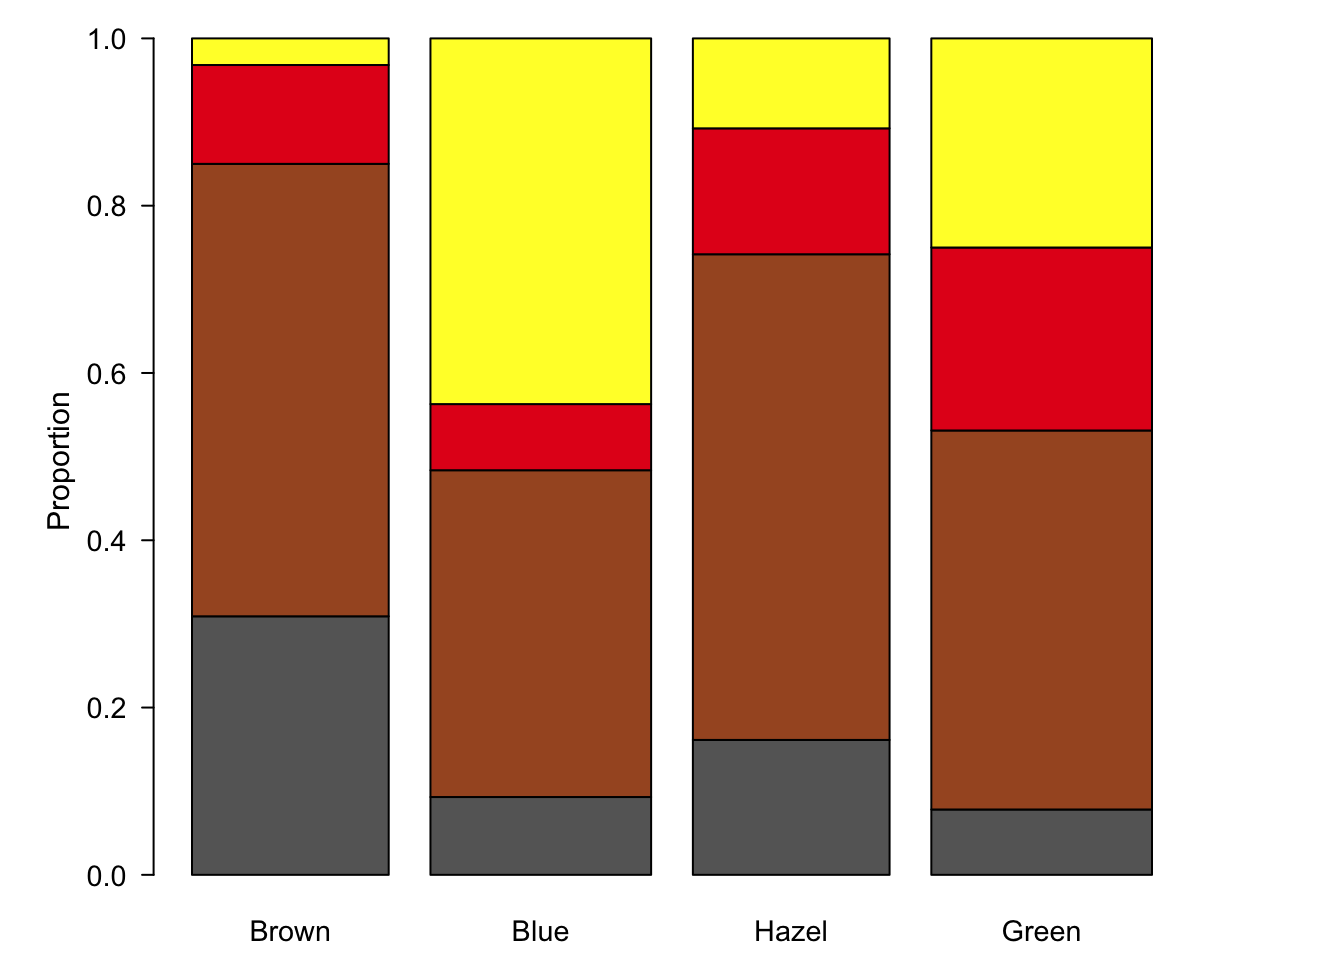 Stacked bar plots are an alternative to pie charts, but also suffer from visual perception problems such as un-aligned scales.